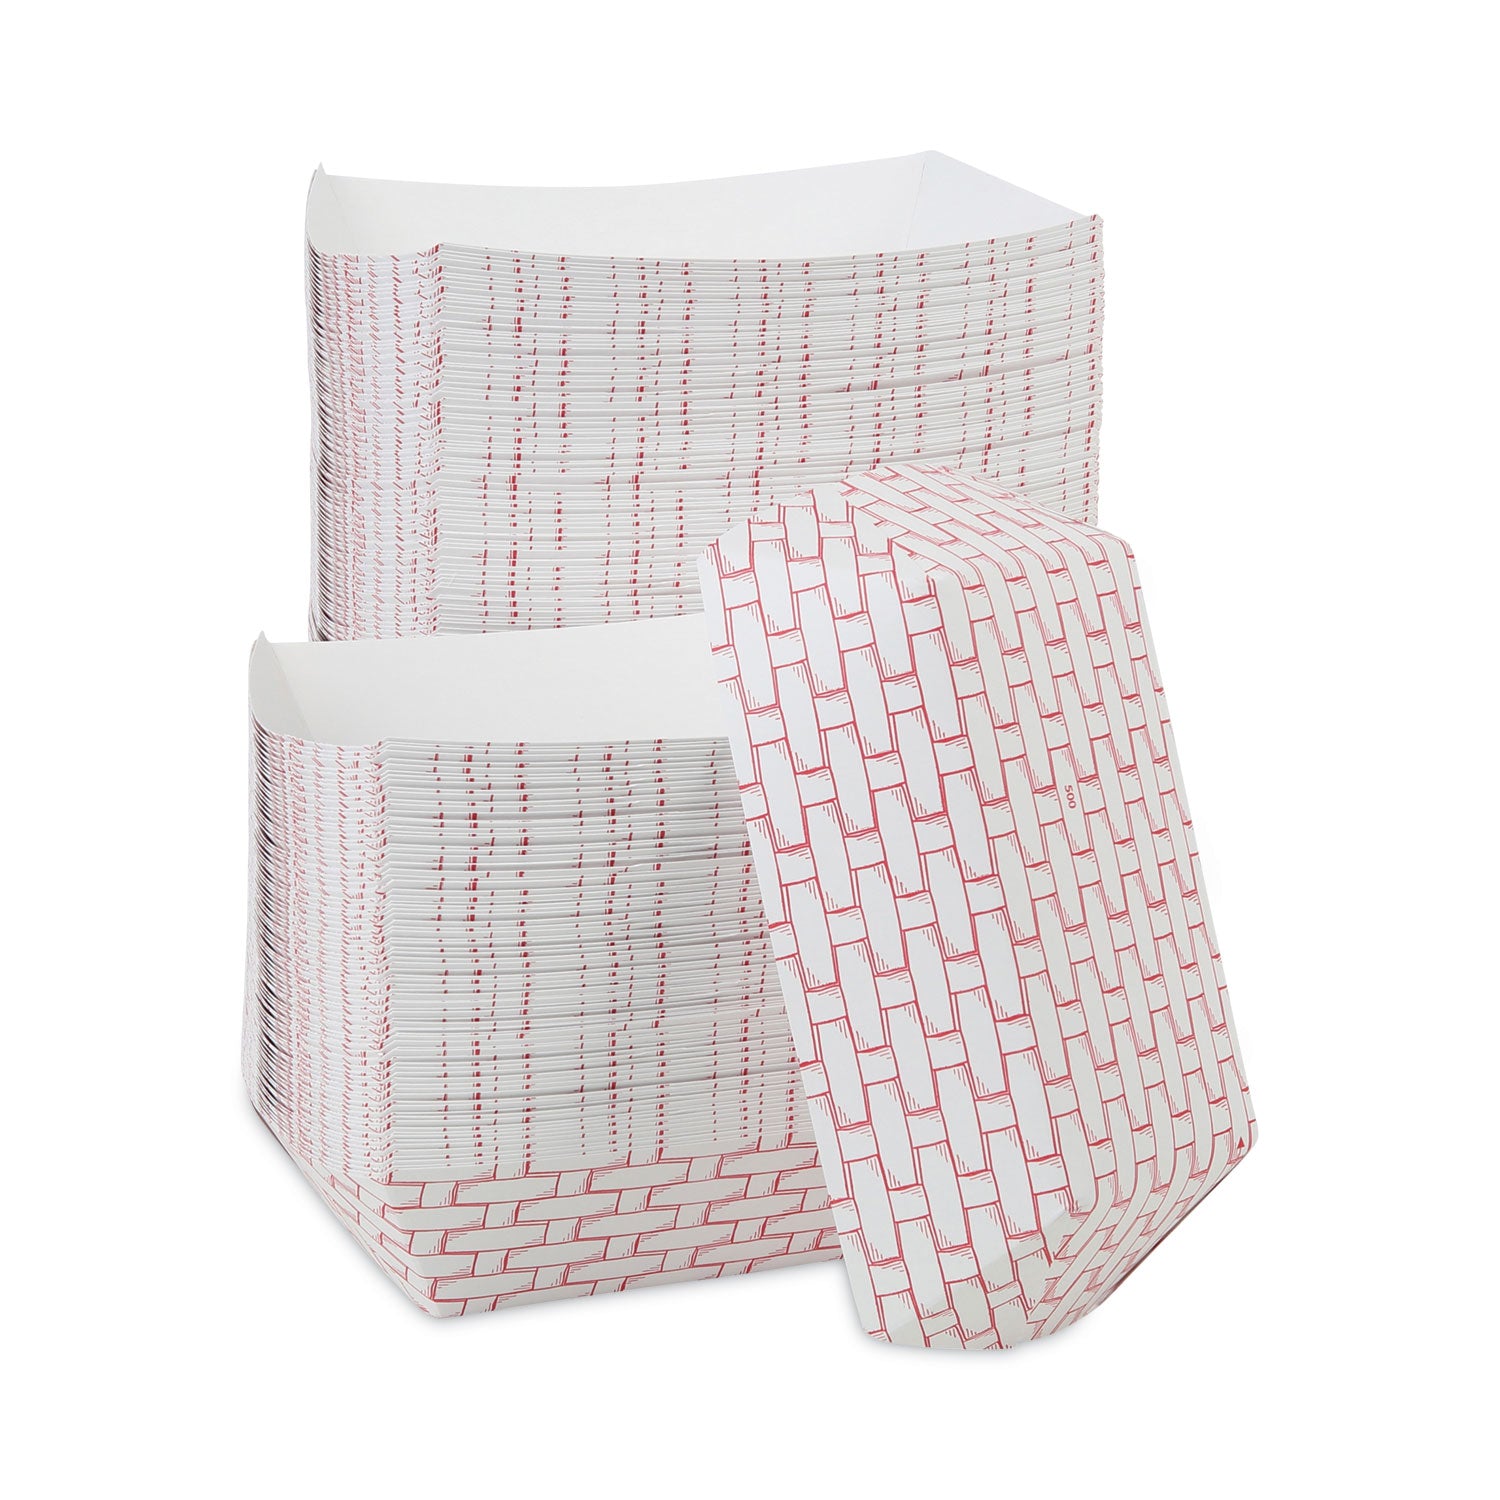 Paper Food Baskets, 5 lb Capacity, Red/White, 500/Carton - 